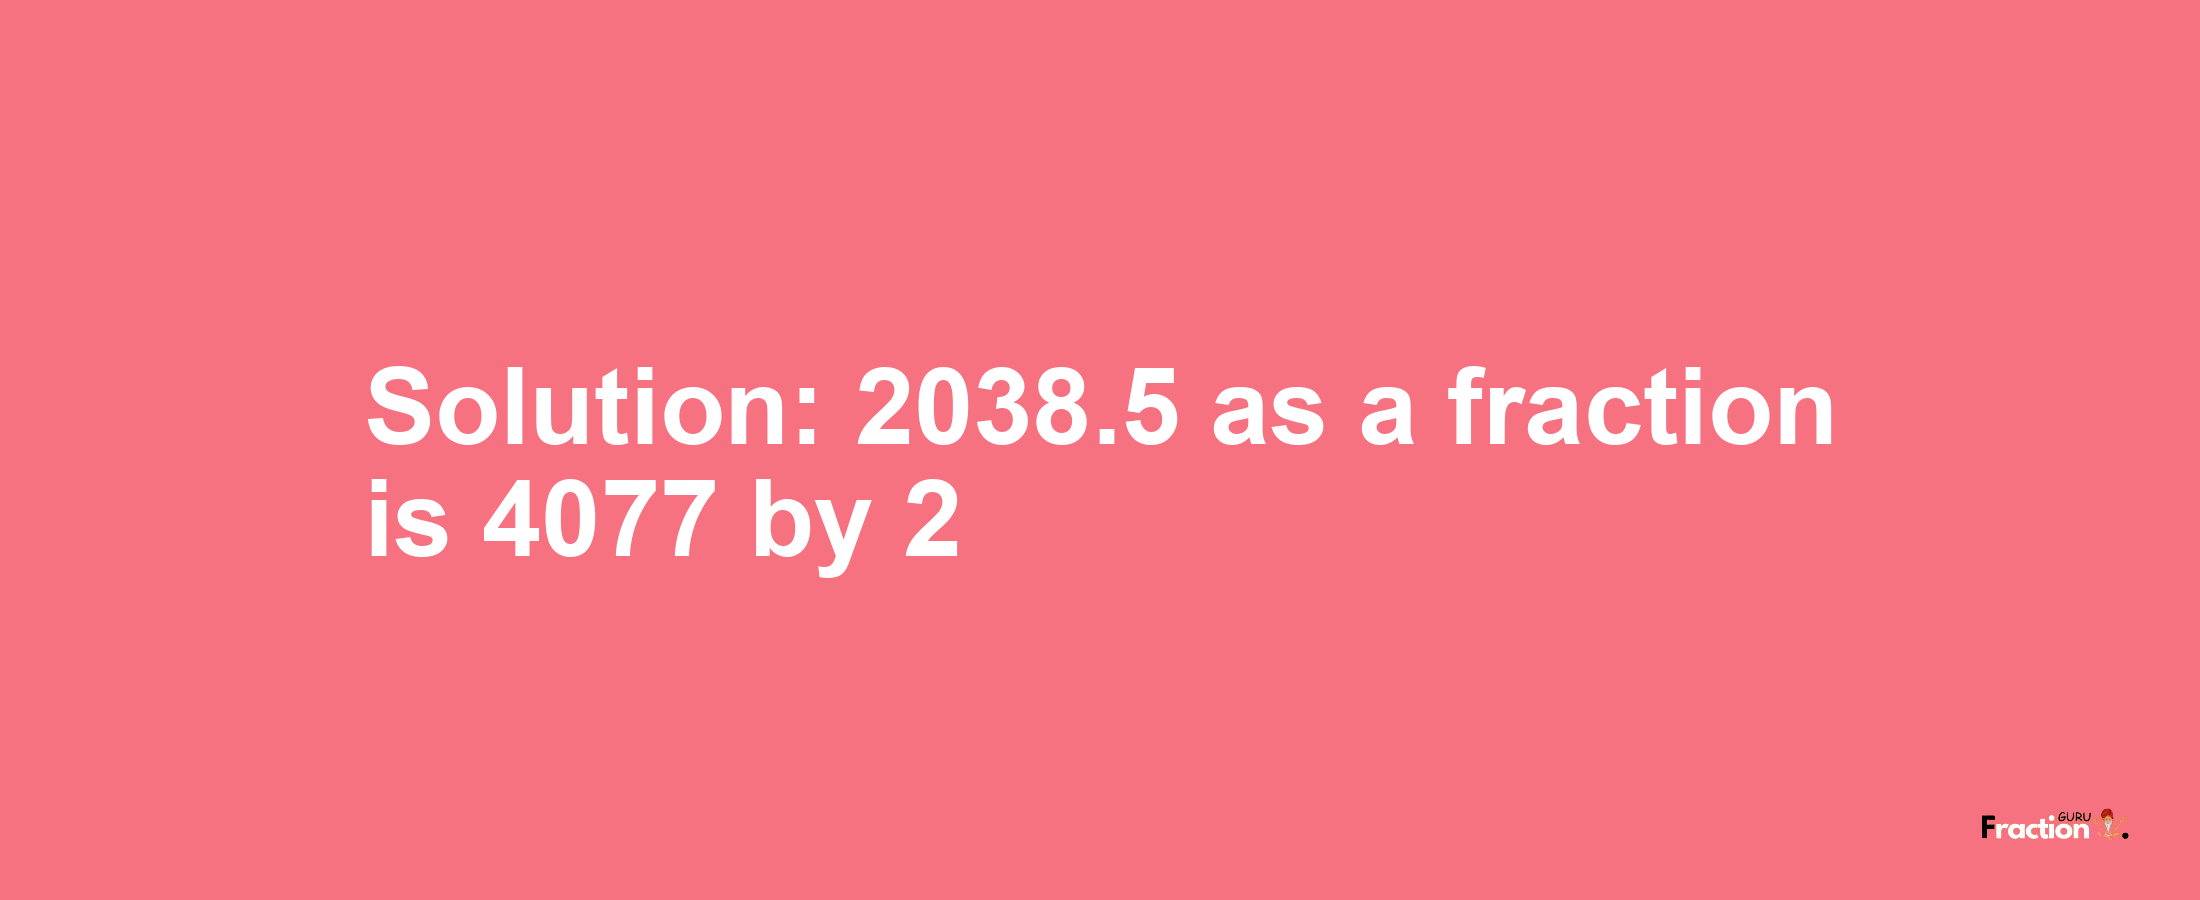 Solution:2038.5 as a fraction is 4077/2